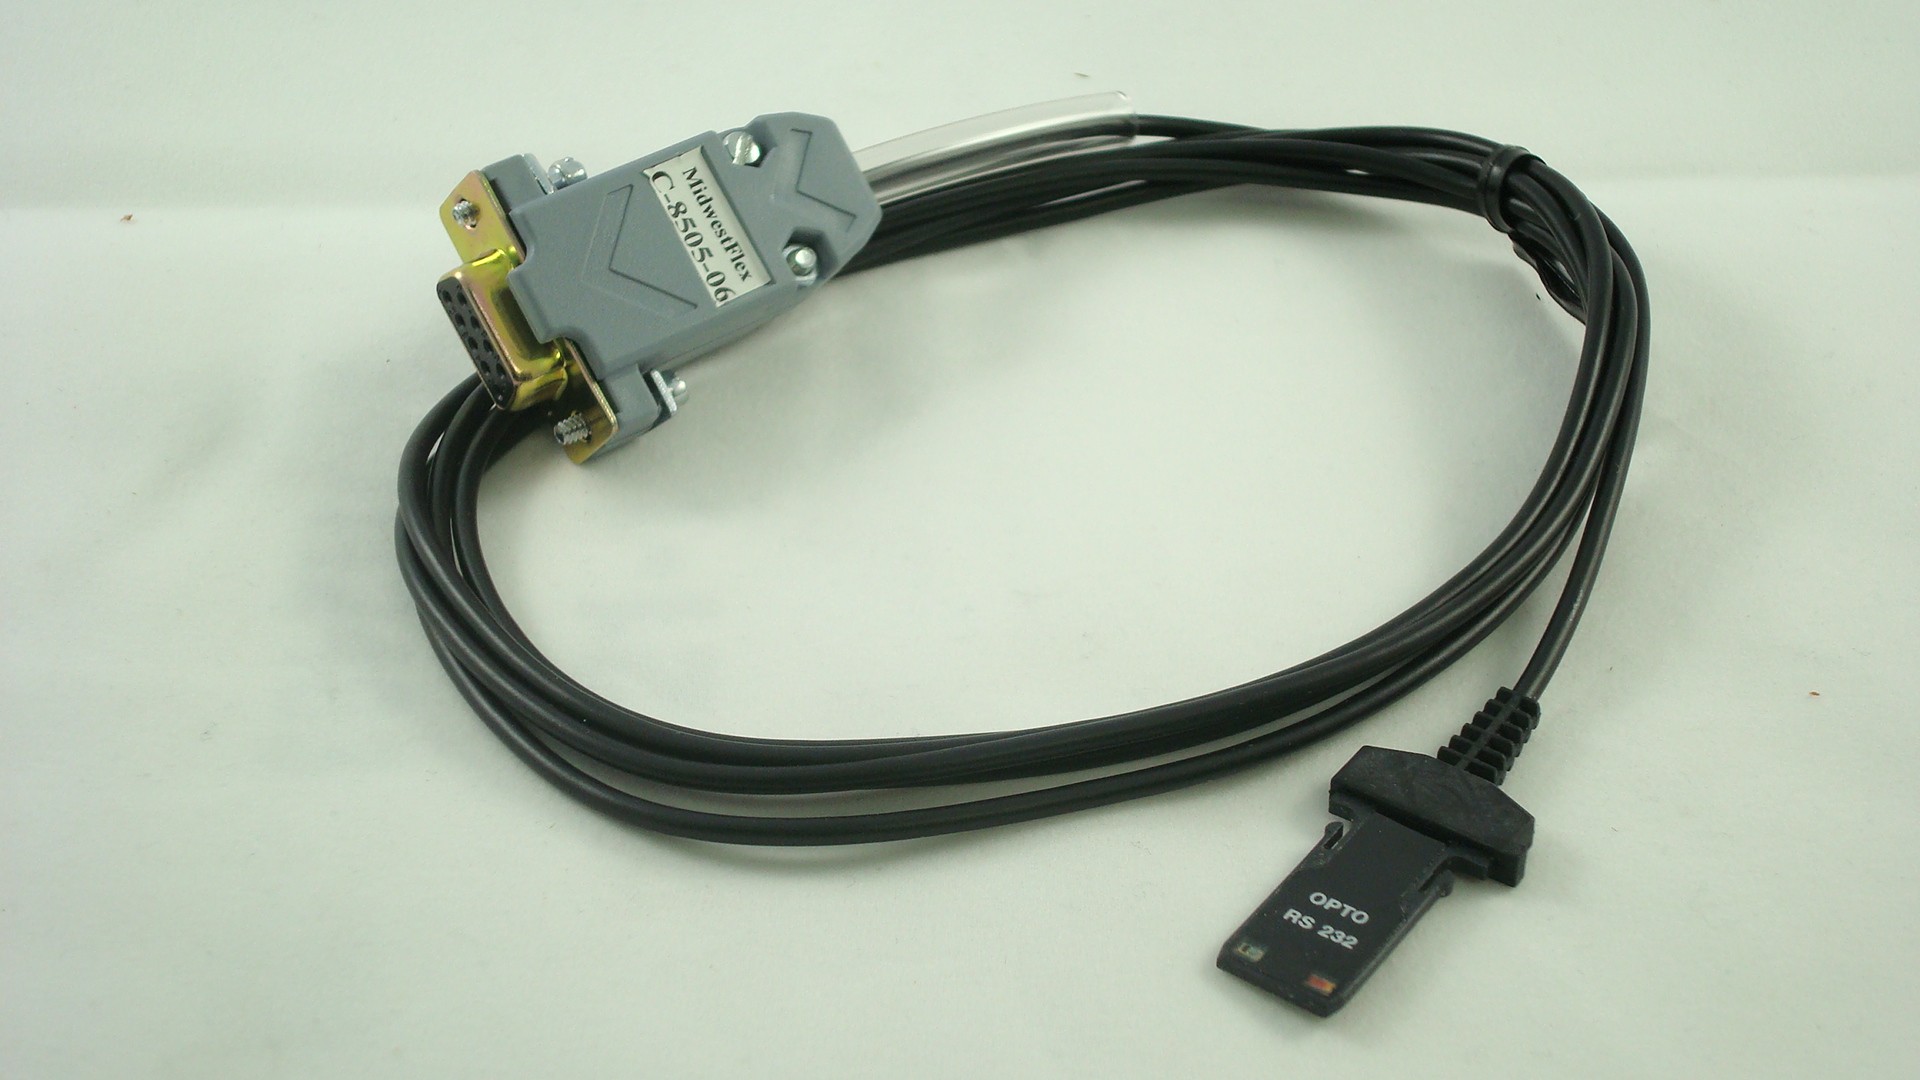 C-8510-06 Mahr Millitast Indicator with Opto/RS232 to 10 pin connector